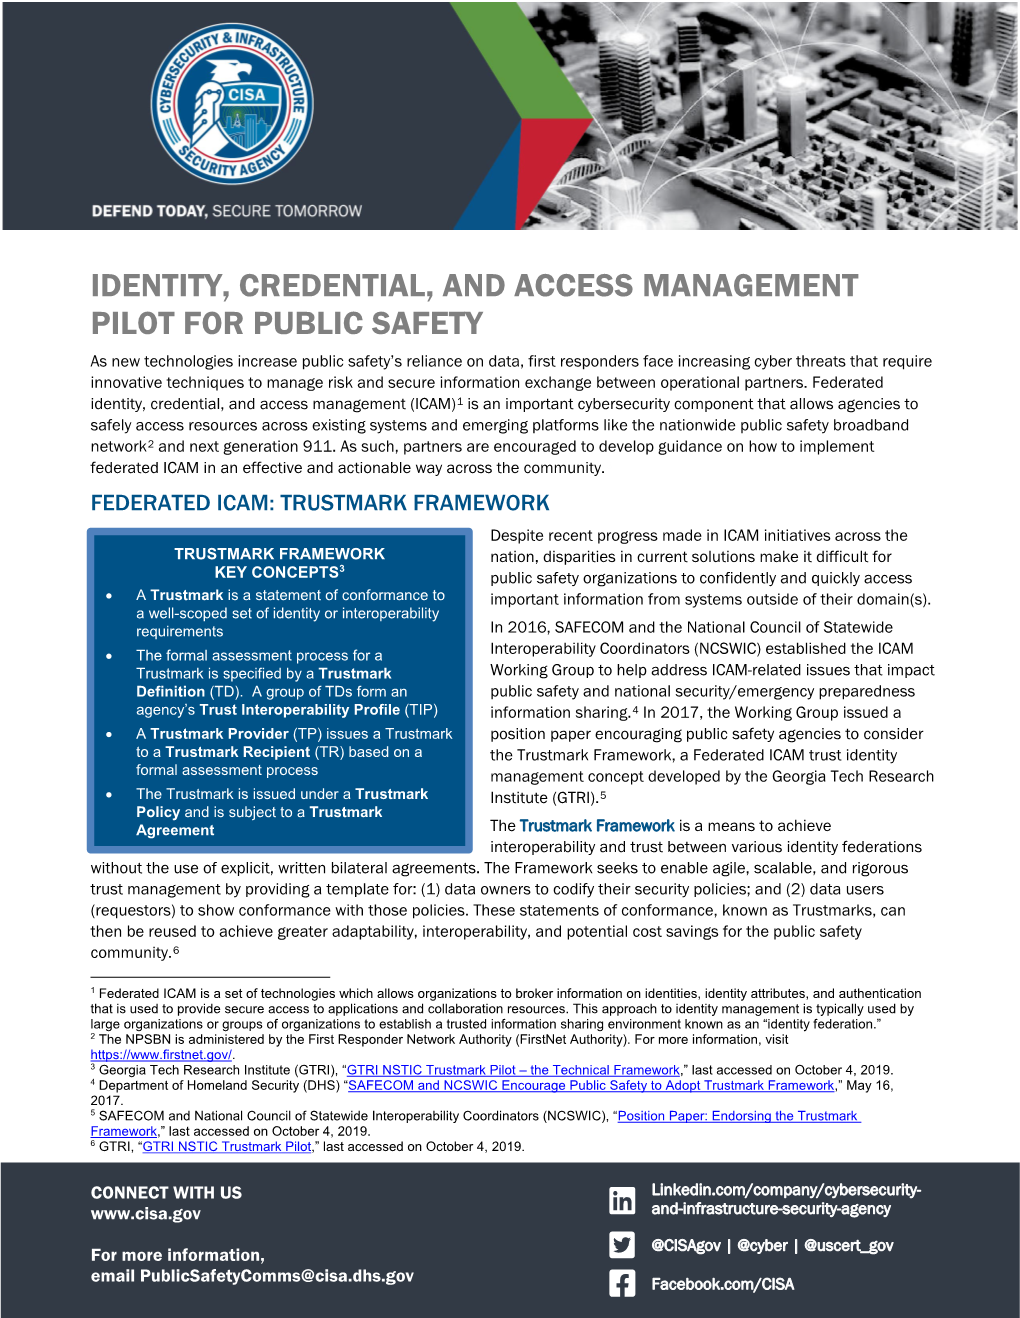 Identity, Credential, and Access Management Pilot for Public Safety